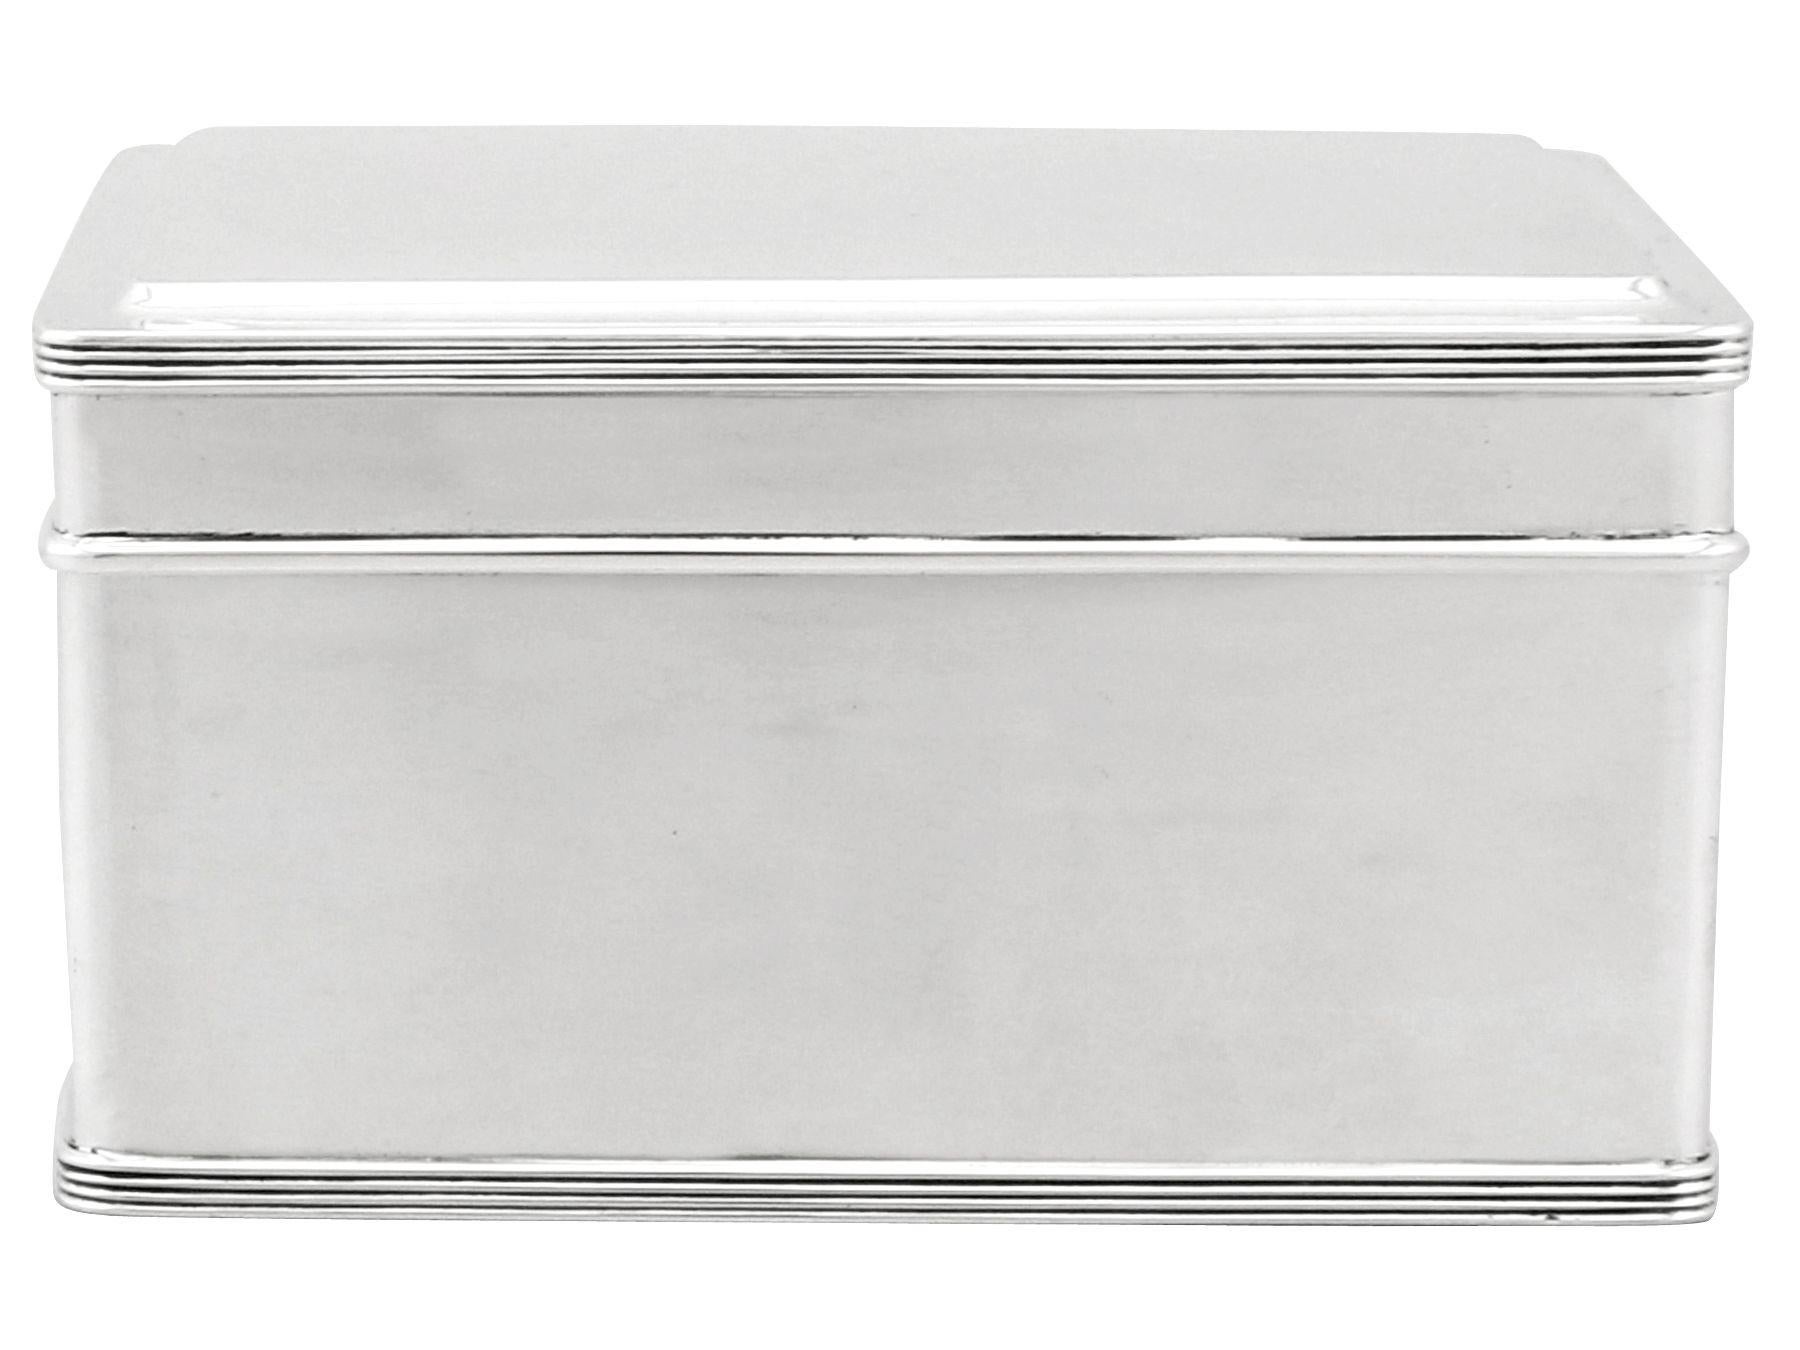 An exceptional, fine and impressive antique Dutch silver box; an addition to the ornamental silverware collection.

This exceptional antique Dutch silver biscuit box has rectangular form with rounded corners.

The body of the box is plain and